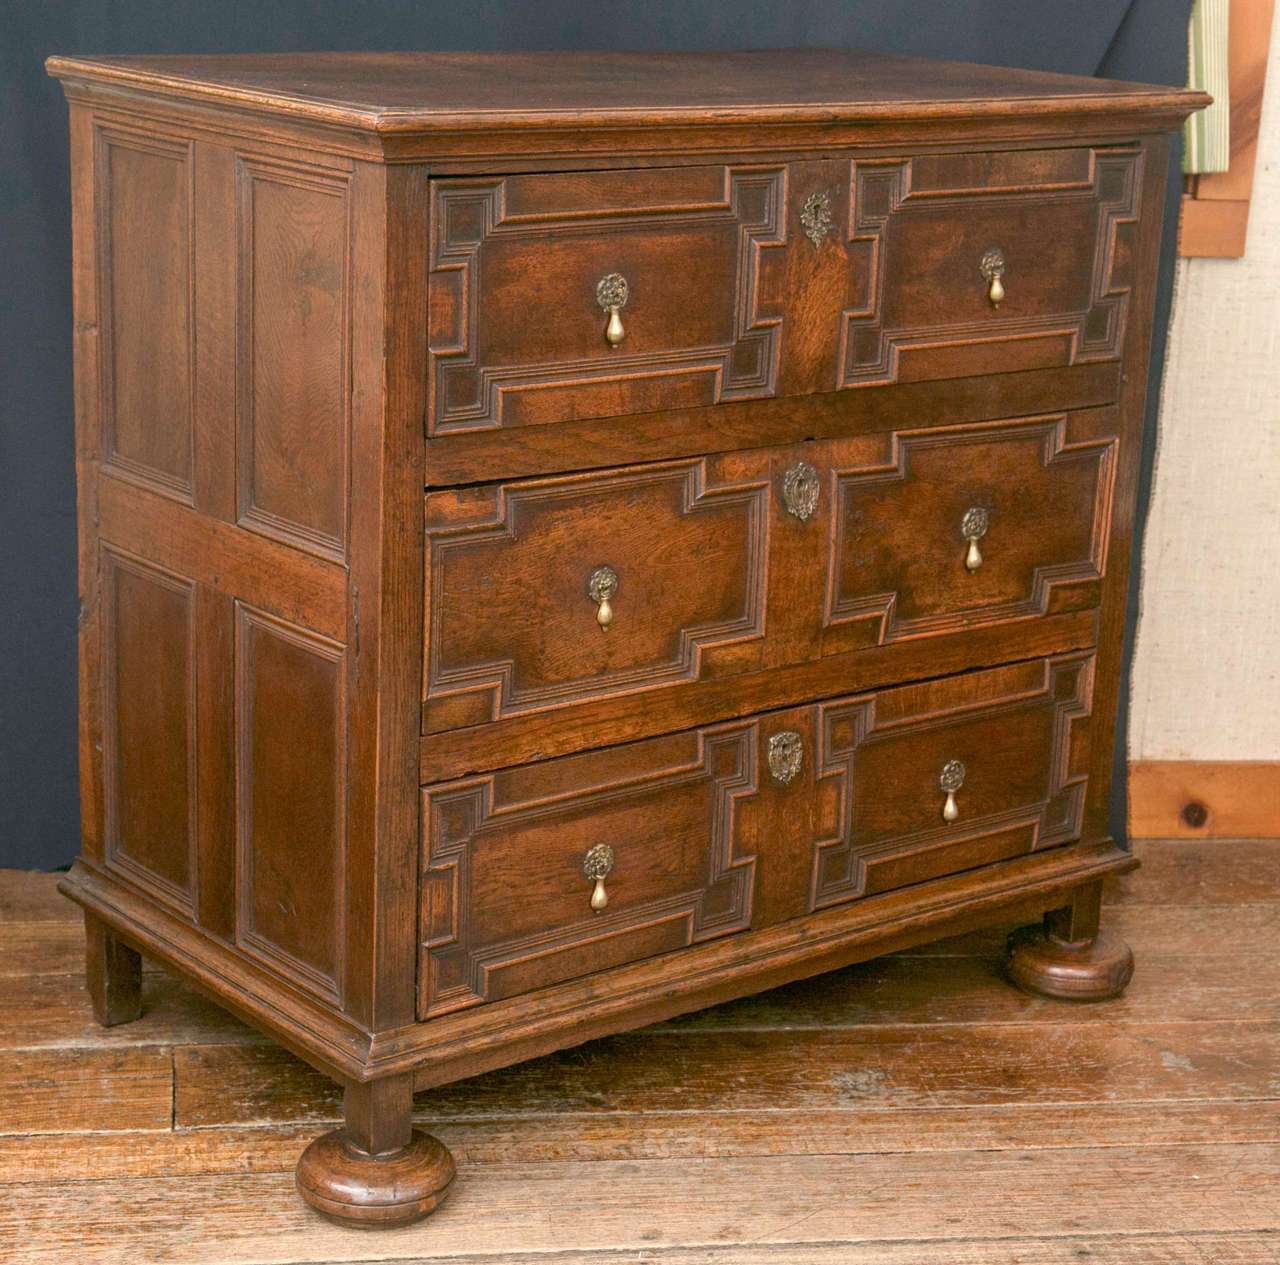 Constructed at the height of England’s love affair with oak, this three drawer chest displays all the features associated with the design of the era. A deeply molded top, geometric panels on the drawer fronts on drawers with side runners and